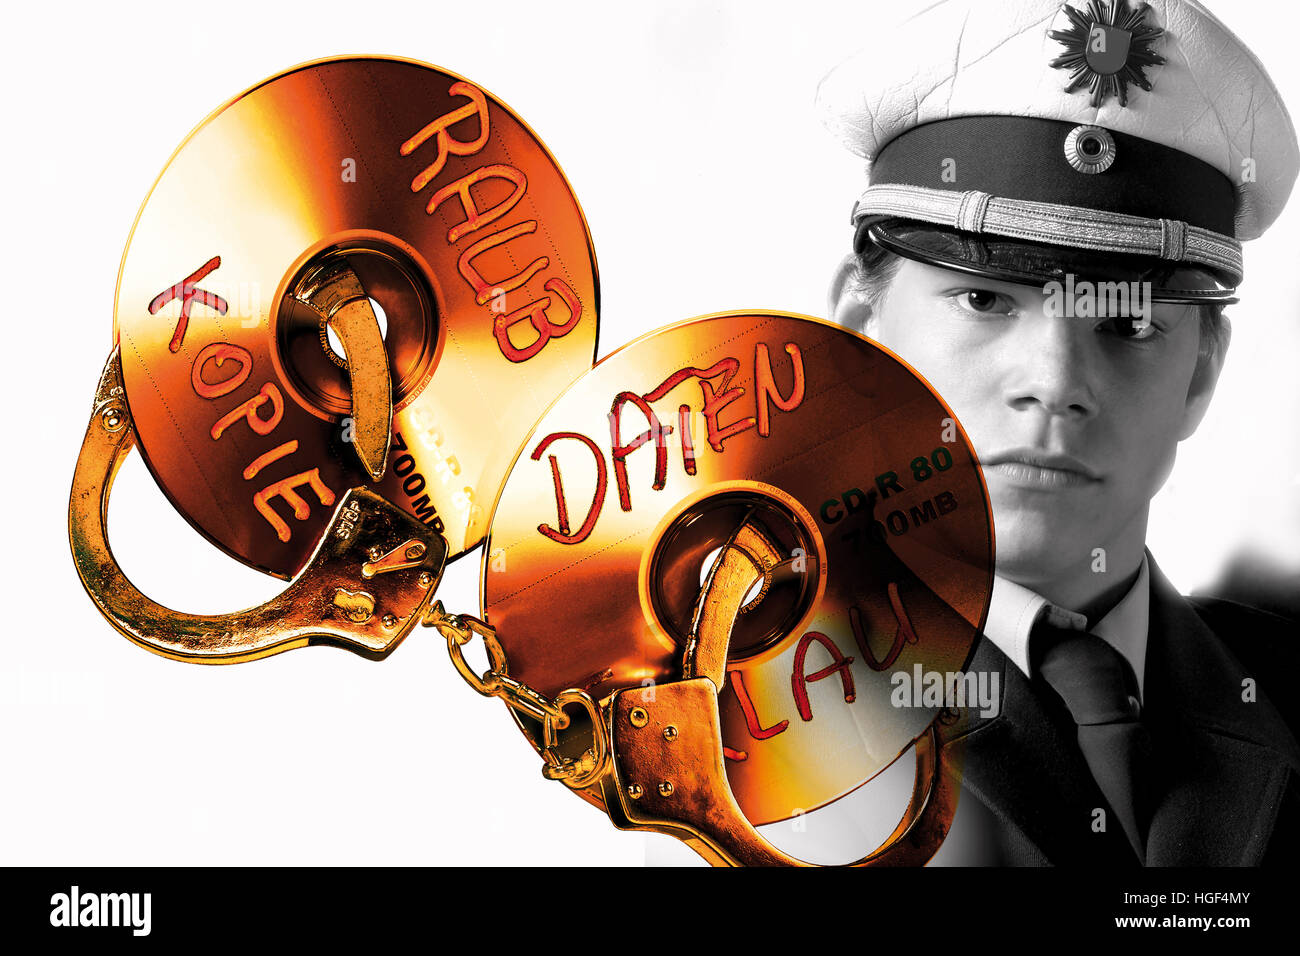 Handuffs and CD/DVD, police officer in background: symbolic for data theft crime Stock Photo